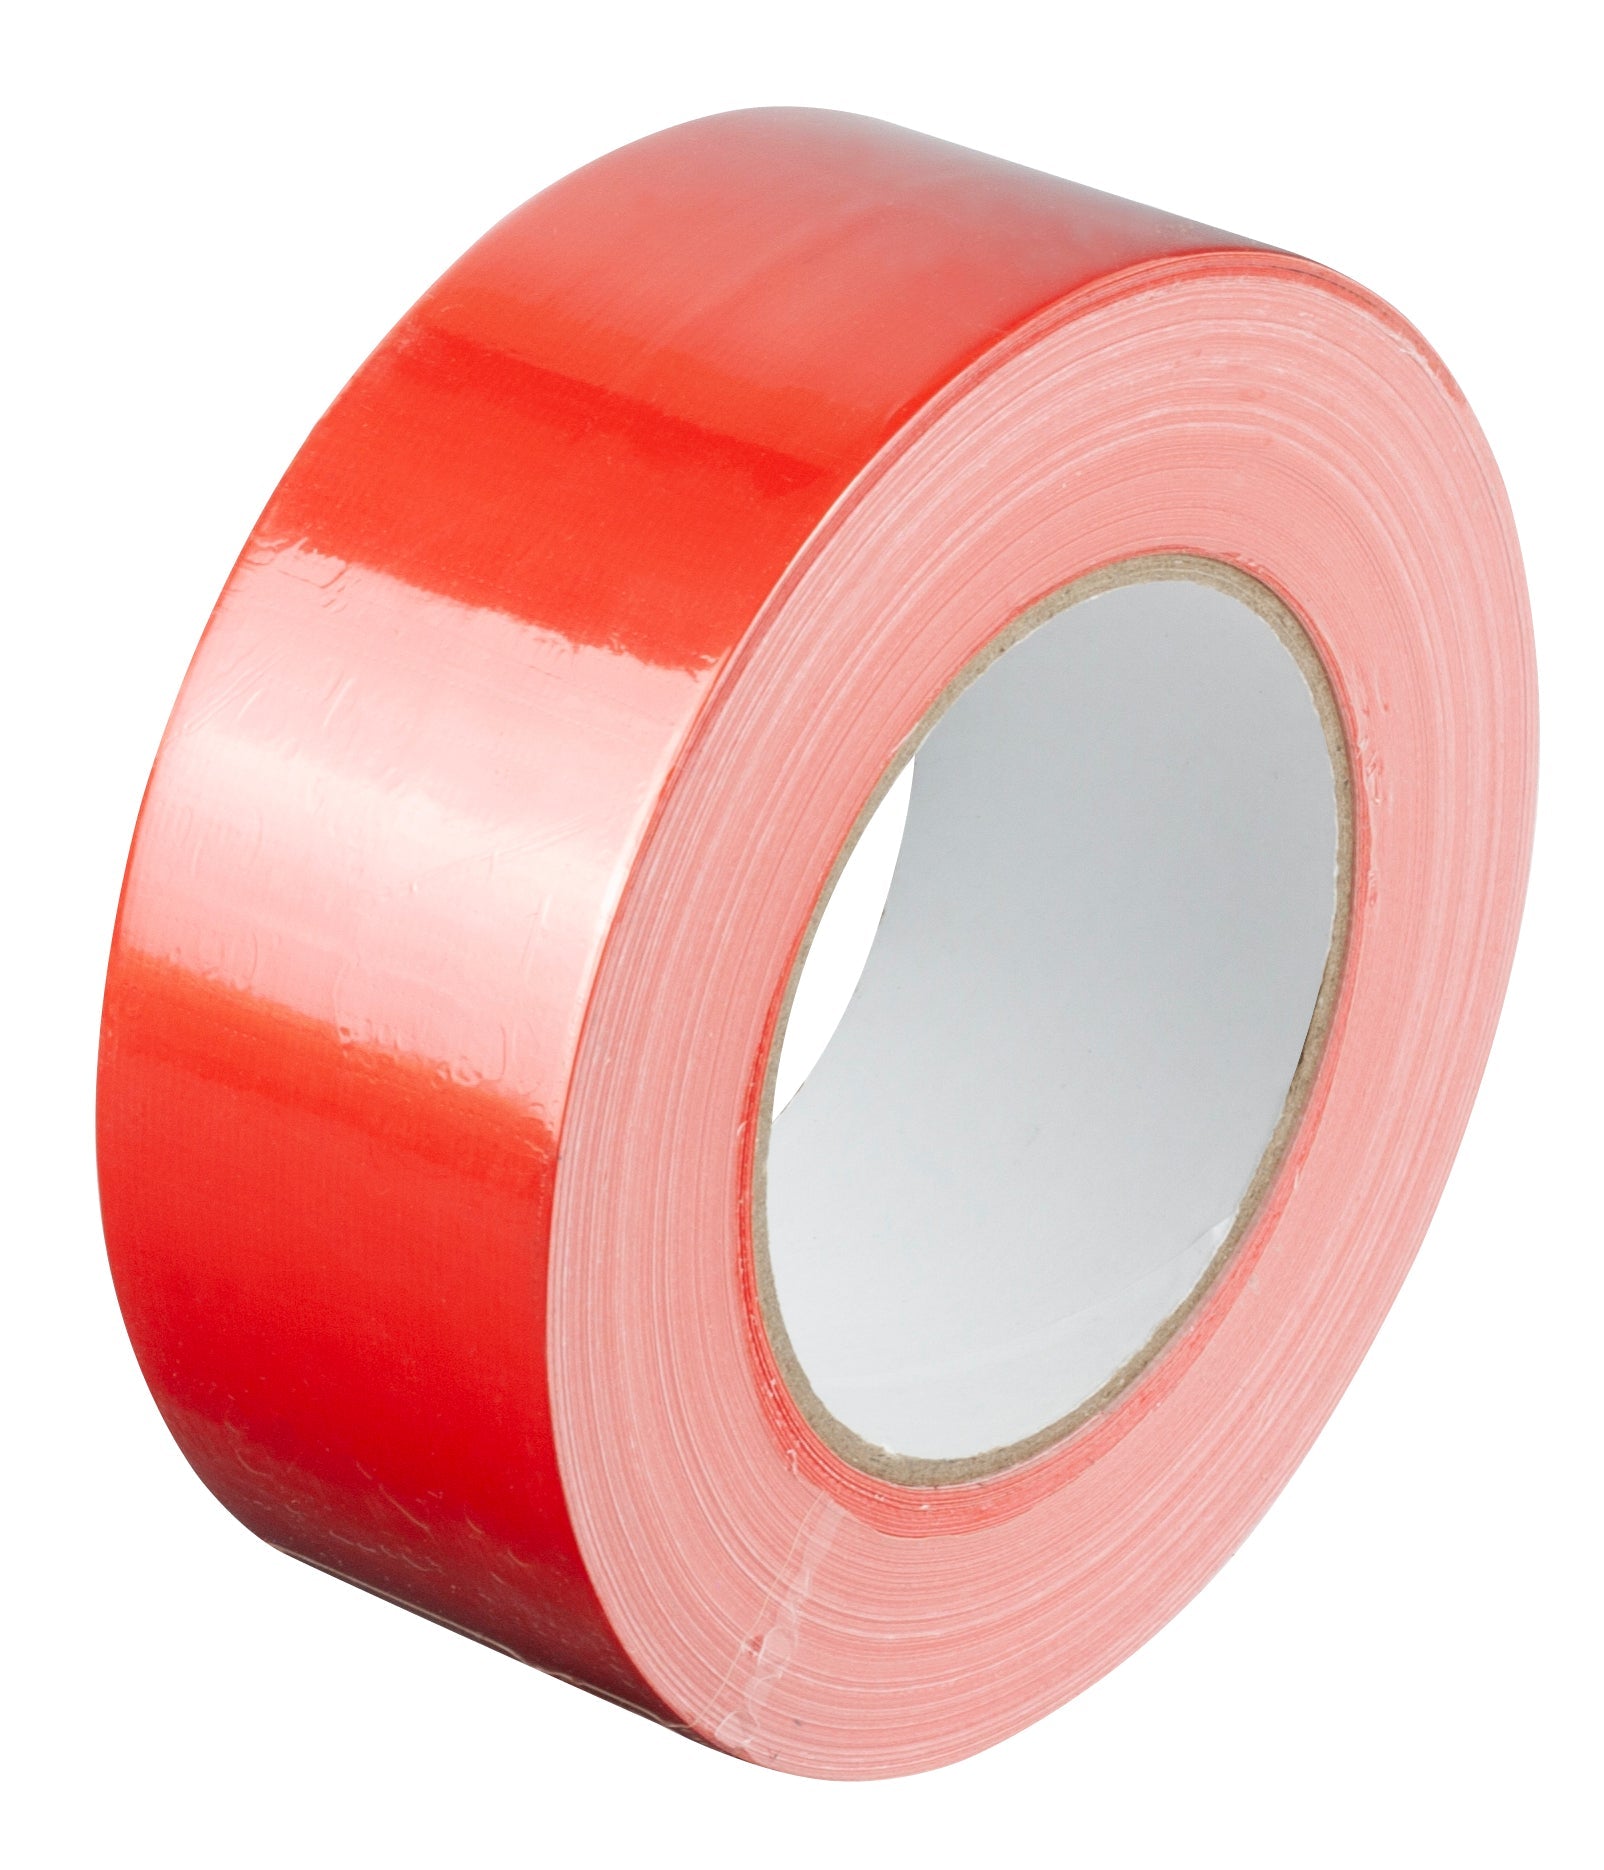 Matka Duct Tape 50 m Duct Tape Price in India - Buy Matka Duct